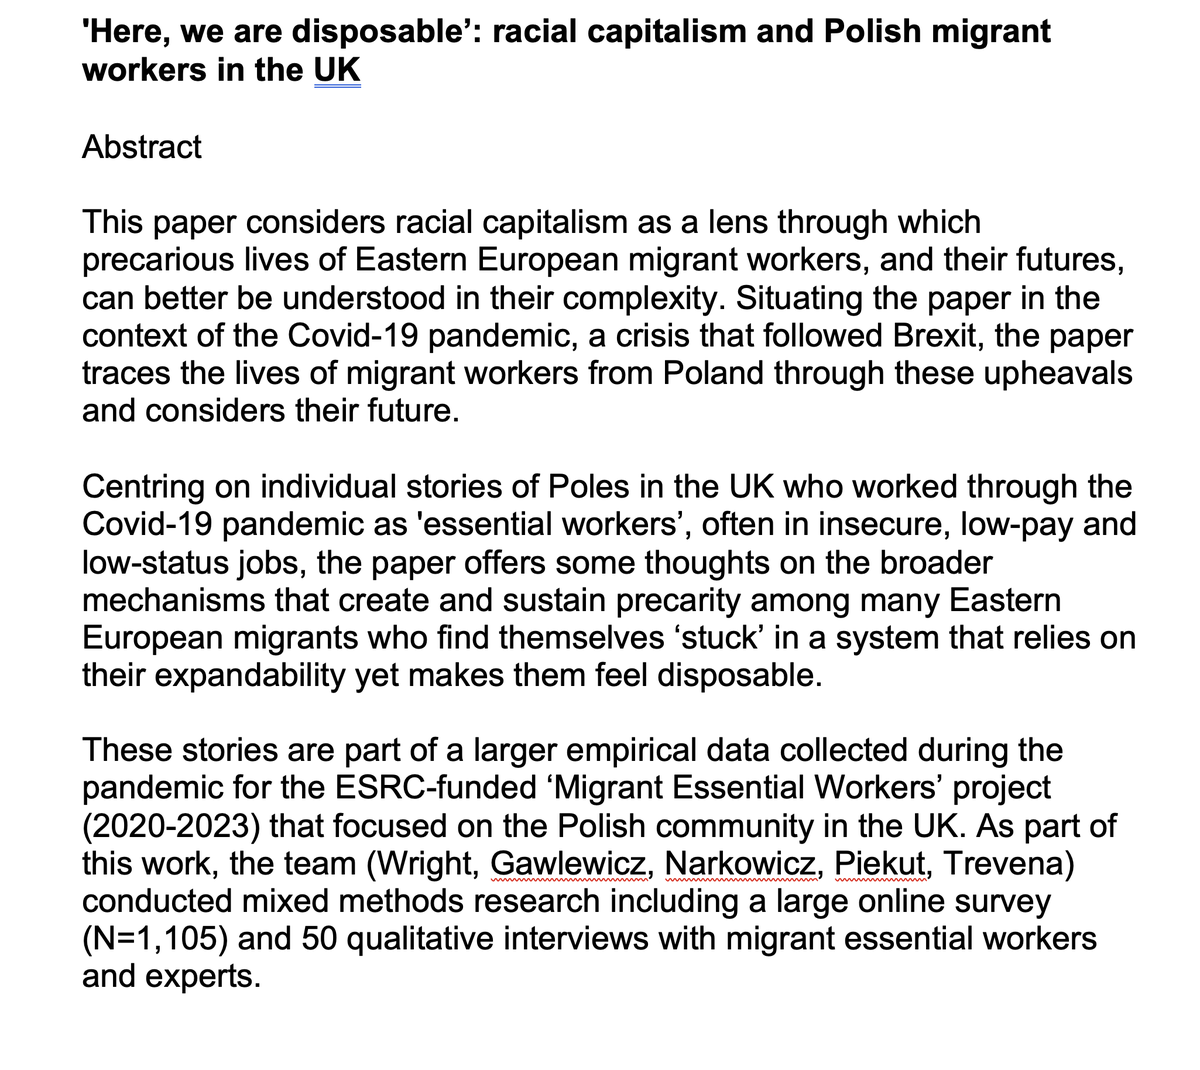 Join us this Wednesday, 15th November 1 pm to hear the brilliant @kasianarkowicz give her paper ''Here, we are disposable': racial capitalism and Polish migrant workers in the UK' - this is an in-person event hosted by @SEI_Sussex & @DiversitySussex in G31, Freeman. All Wellcome!